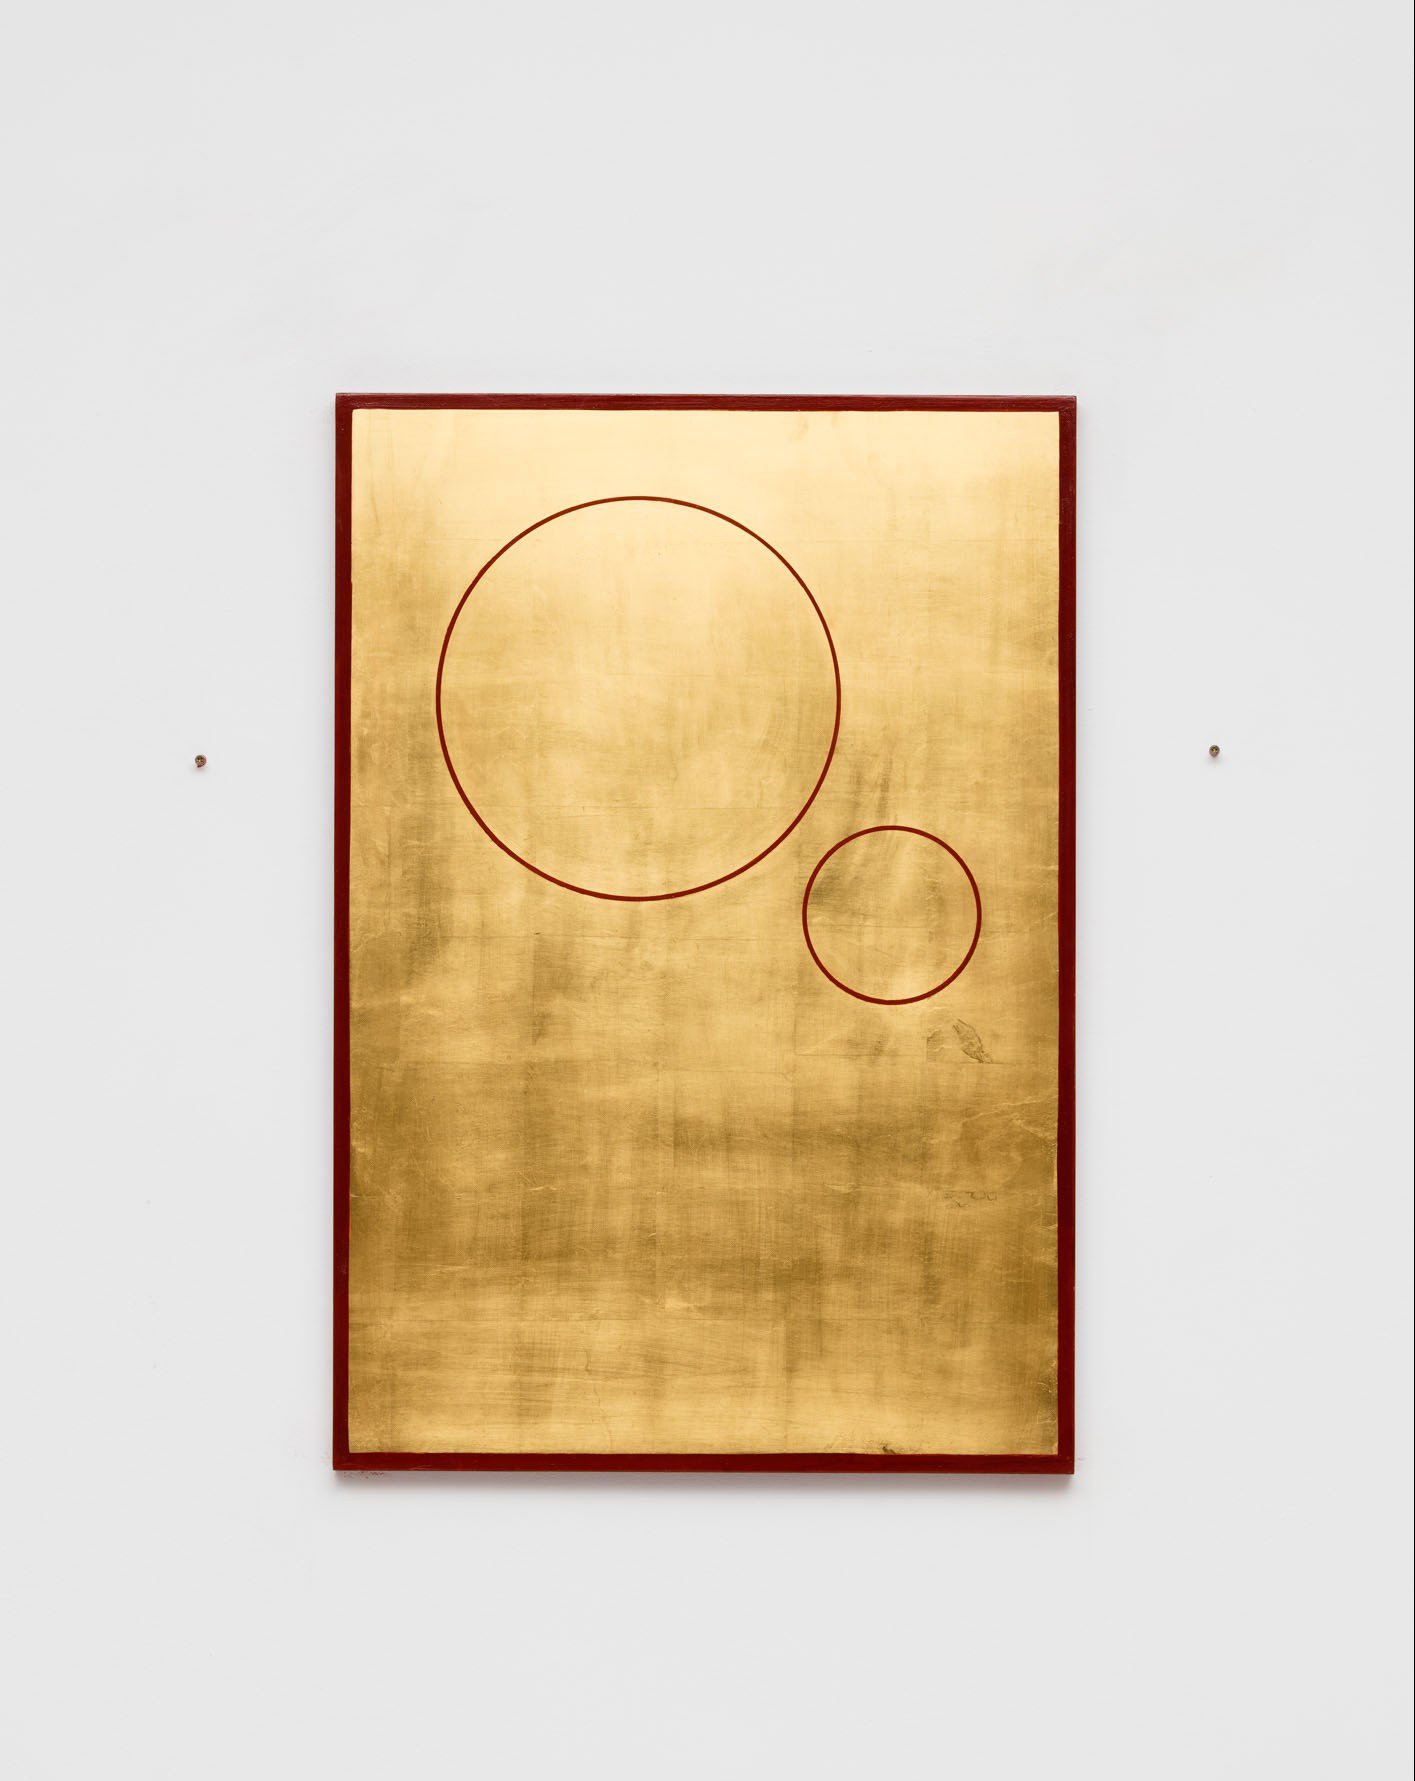 Christodoulos Panayiotou, Untitled, wood, paint, gold leaf, 80 x 55 cm, 2016